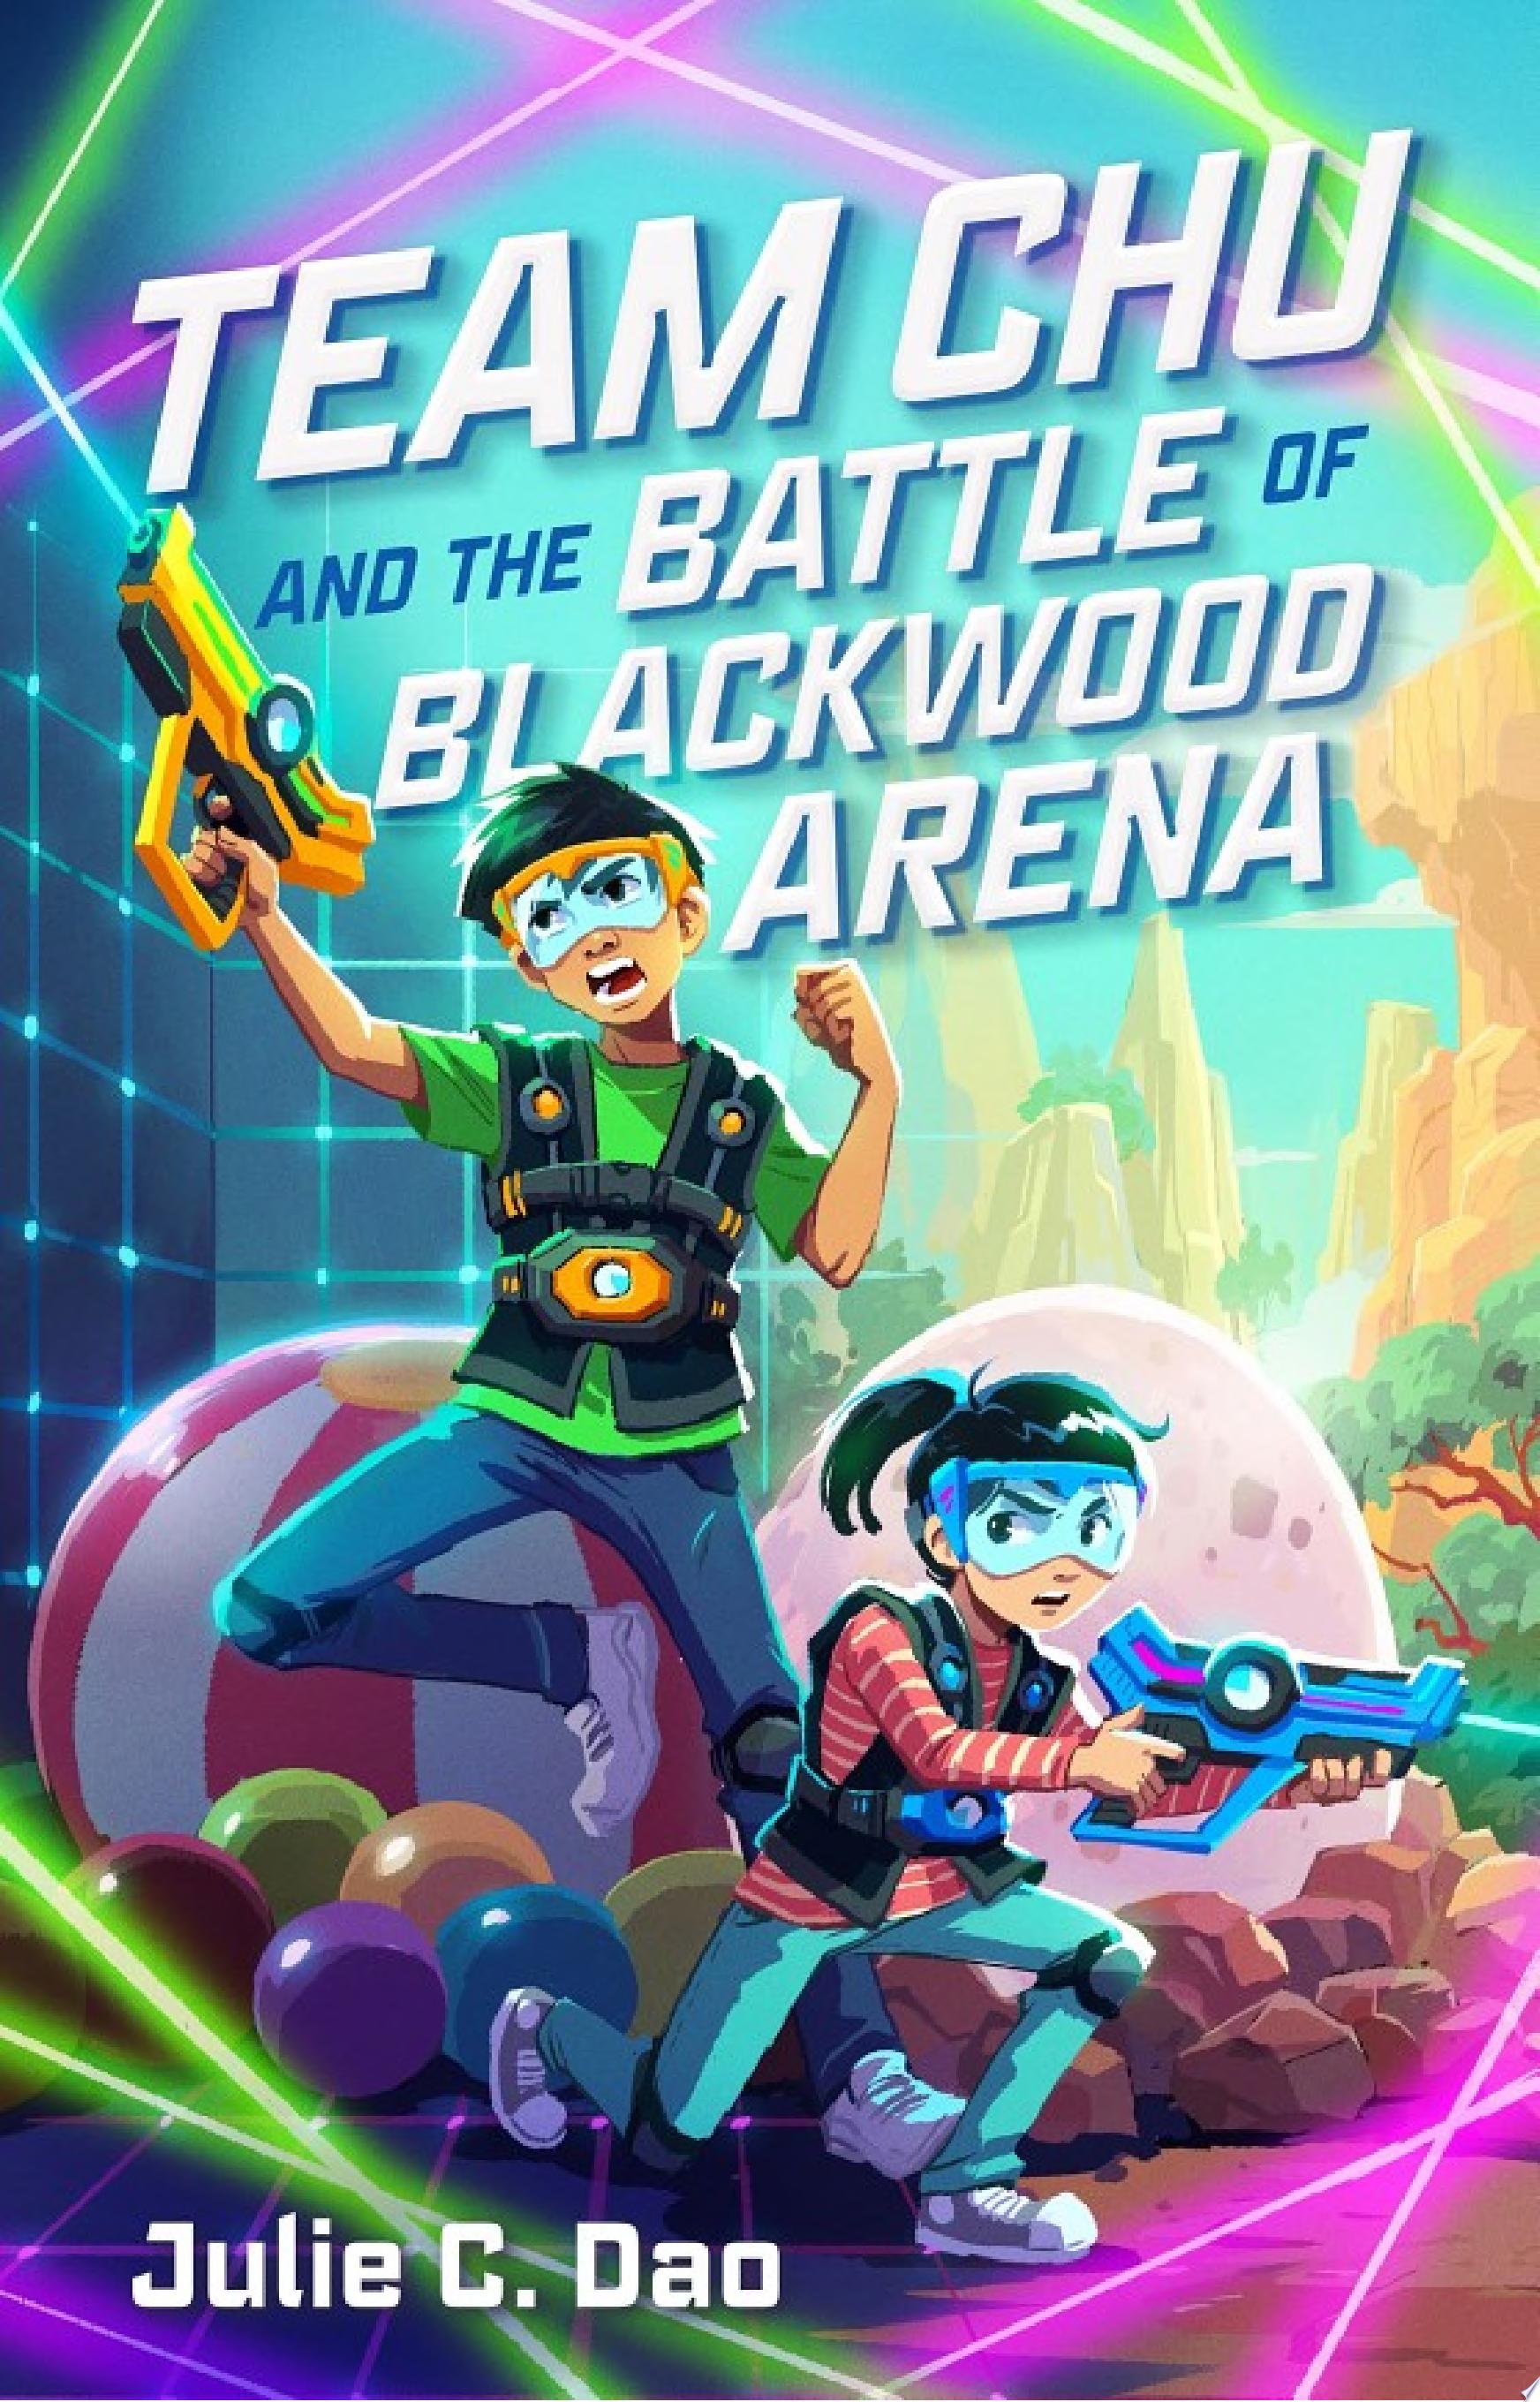 Image for "Team Chu and the Battle of Blackwood Arena"